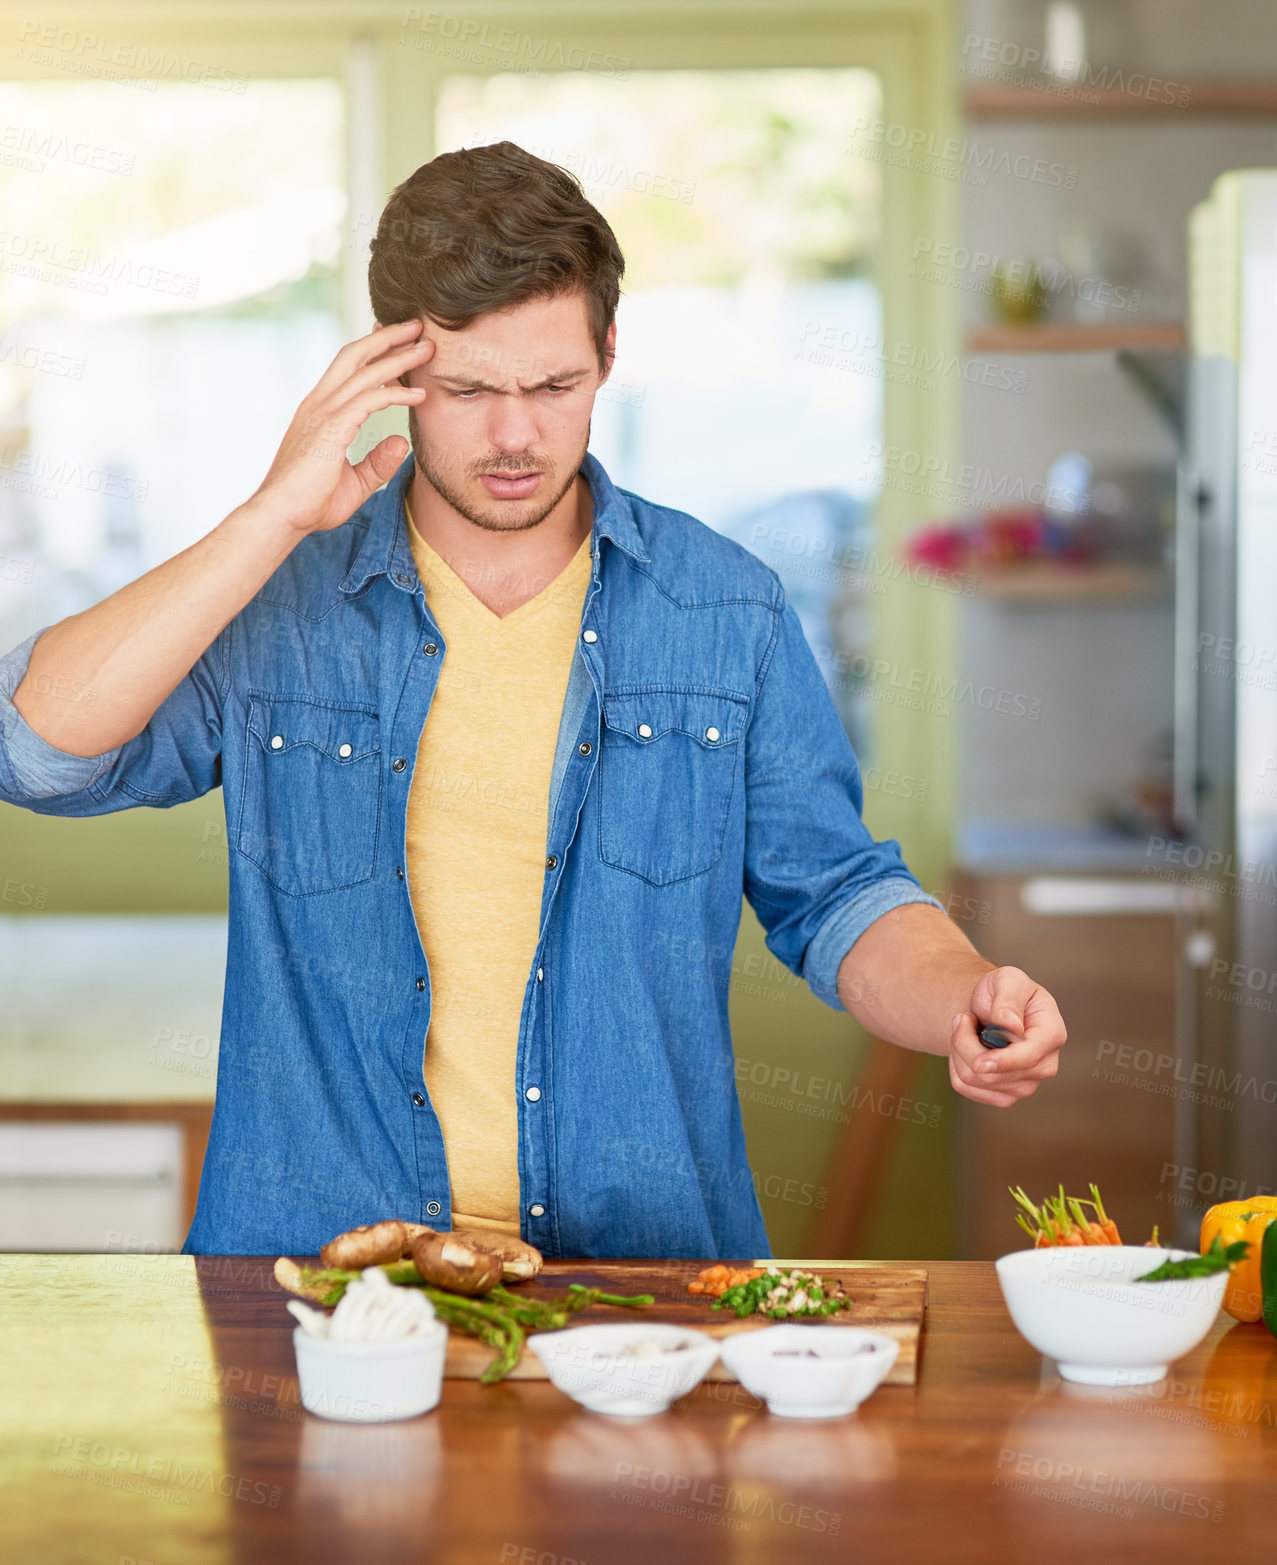 Buy stock photo Shot of a confused young man looking at recipe ingredients on a kitchen counter at home